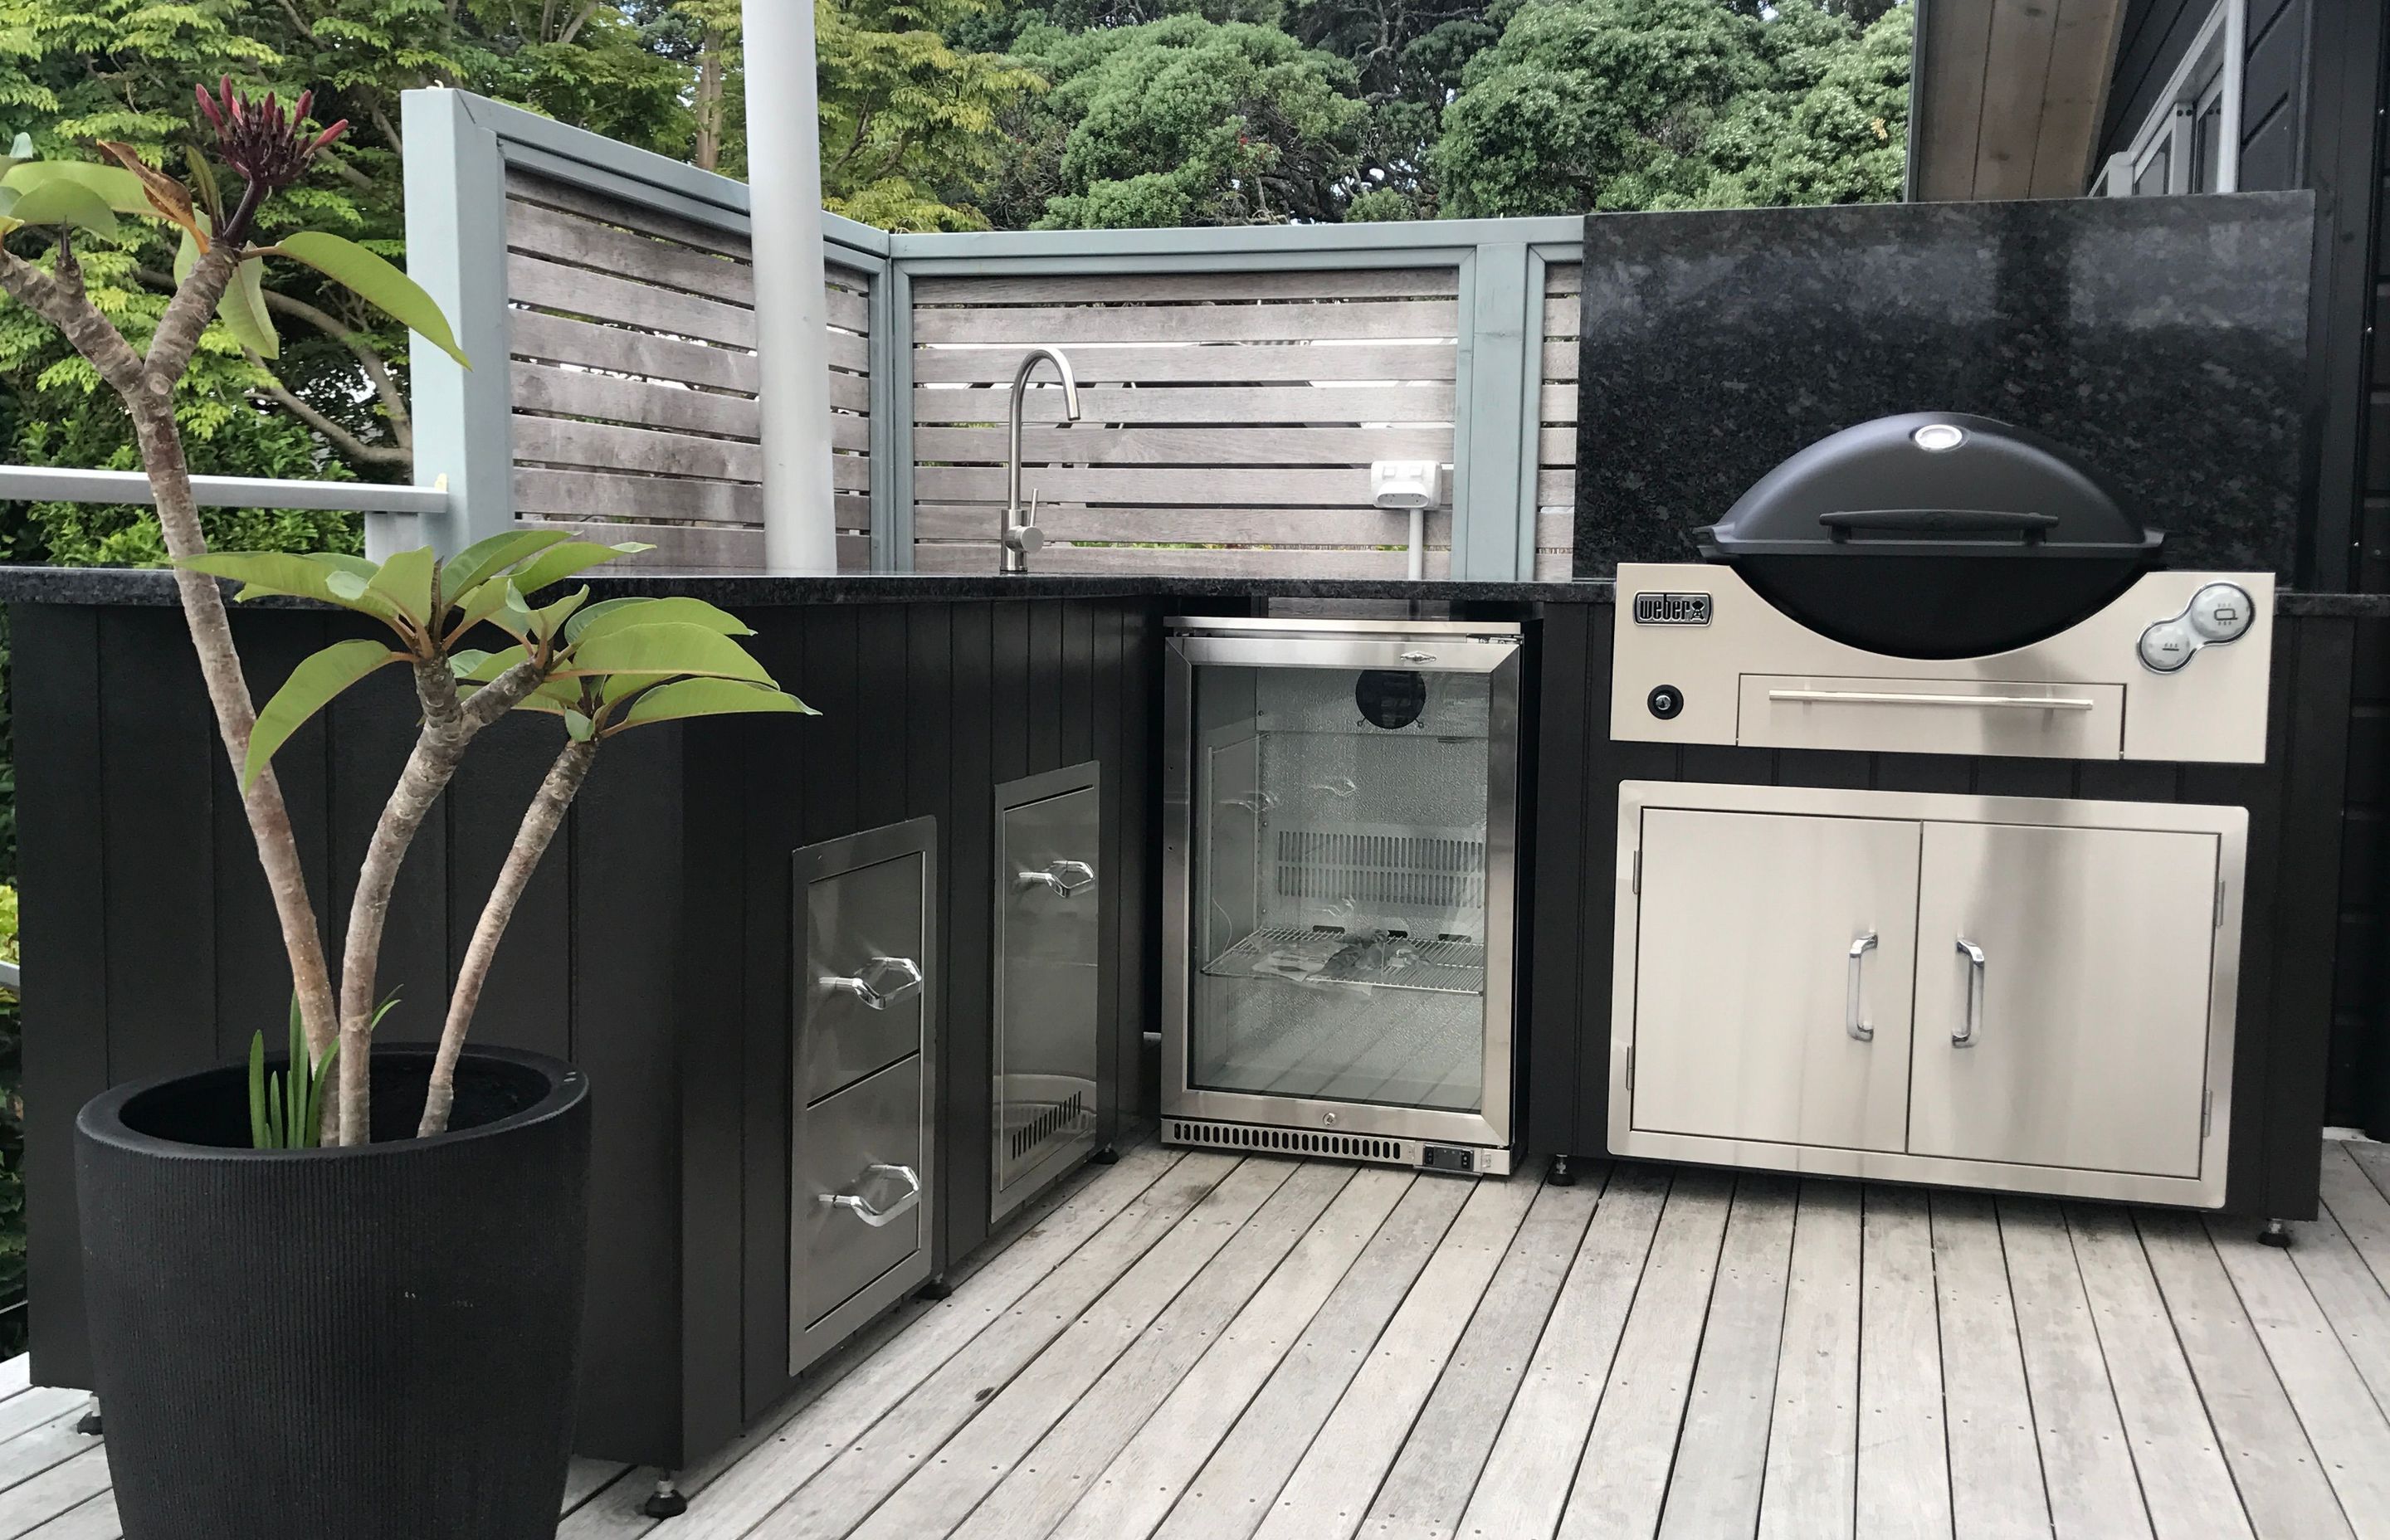 Your outdoor dining experience need not be limited to a simple bbq in the corner. Elevate your entertaining options by getting advice from a specialist.